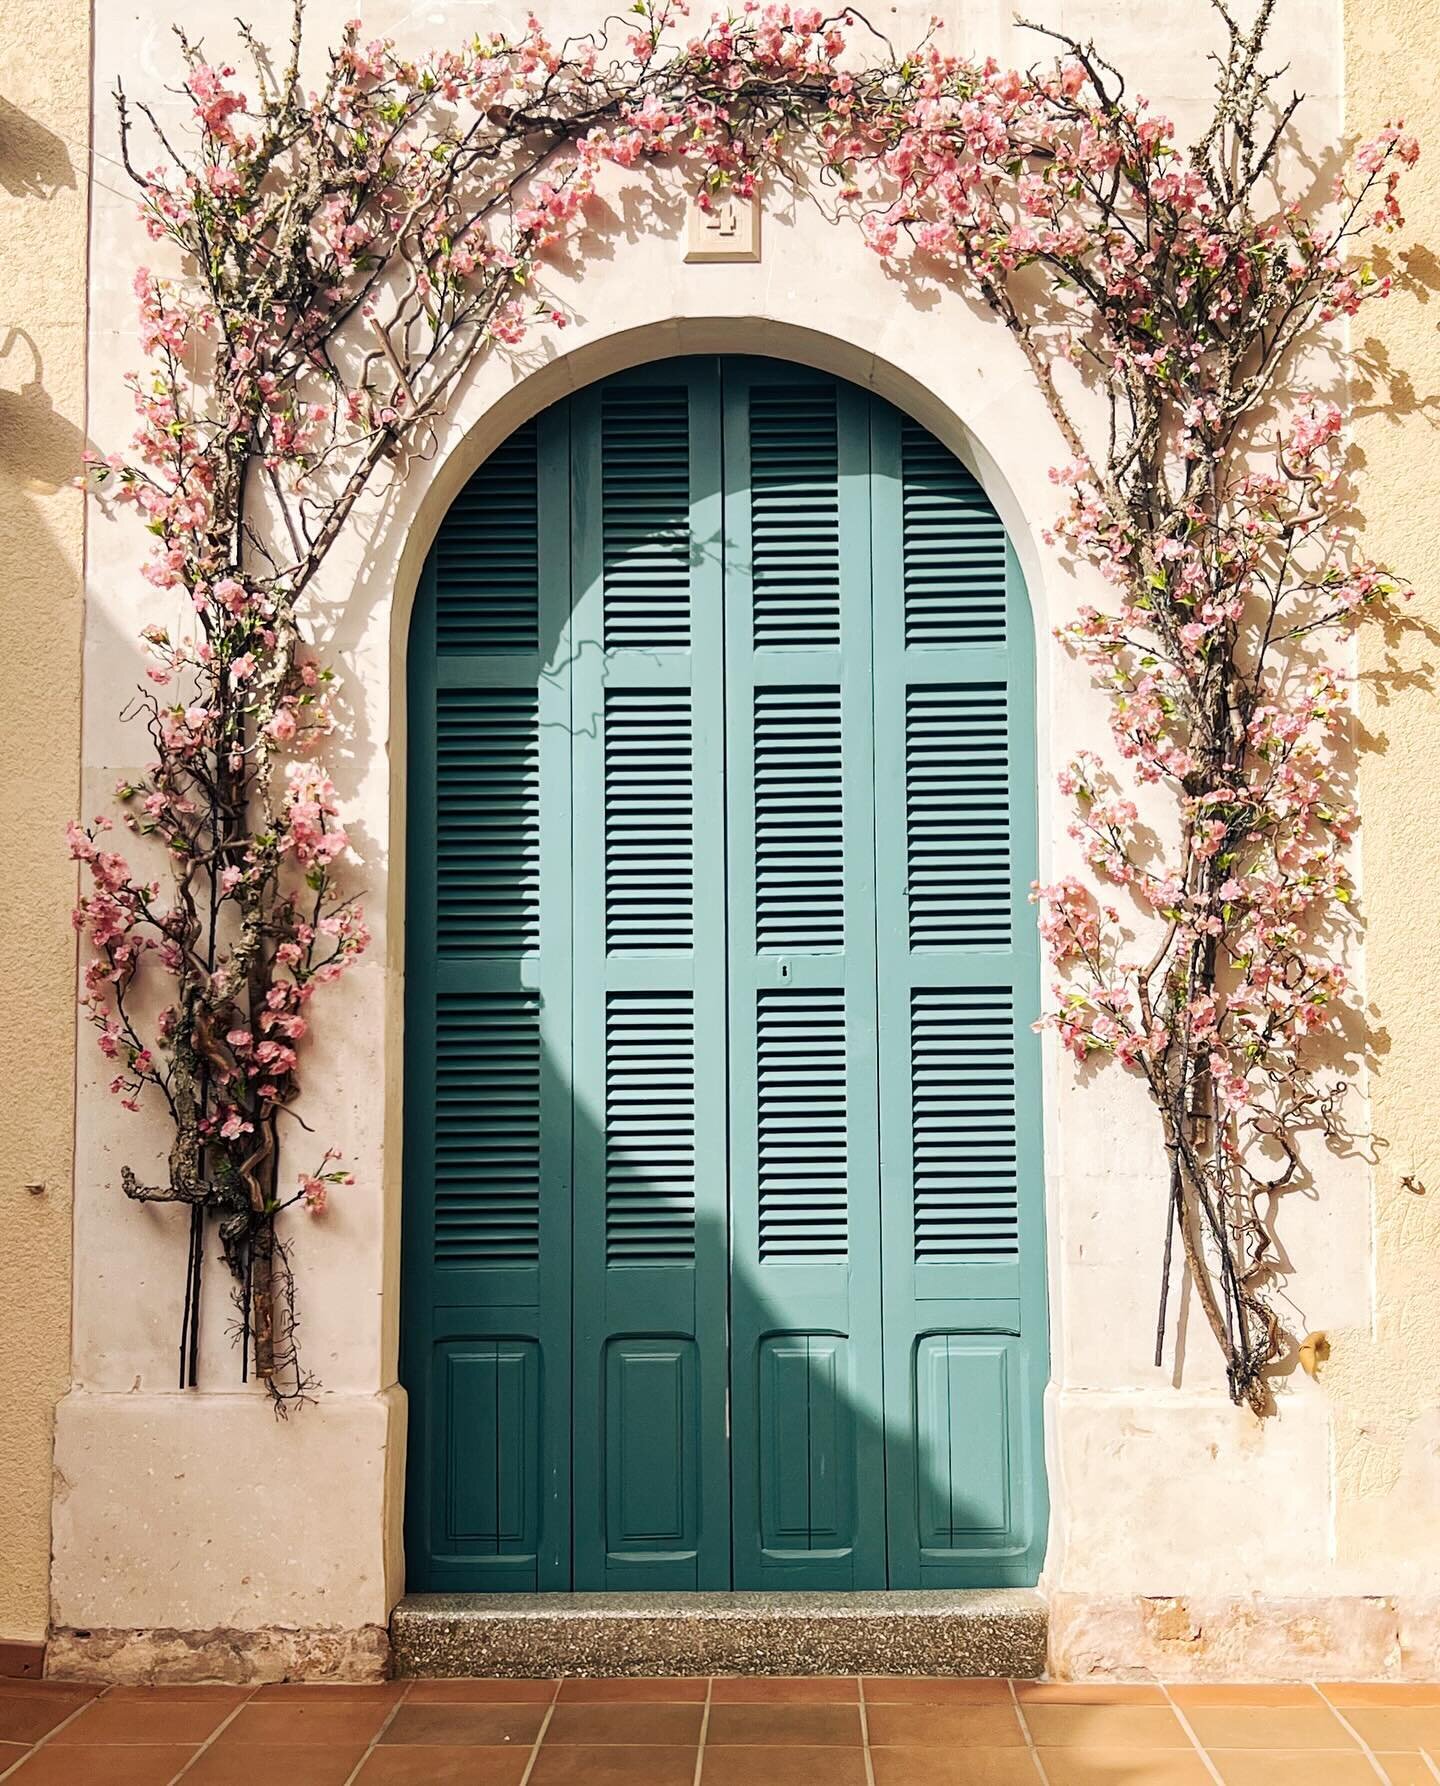 📍Mallorca, Spain

The prettiest doors in the sleepy town of Ses Salines. 

#travelplanner #tripplanner #travelagent #travel #travelblog #vacation #photography #holiday #viator #streetphotography #streetstyle #canon #canonrebel #suitcasetravels #fort